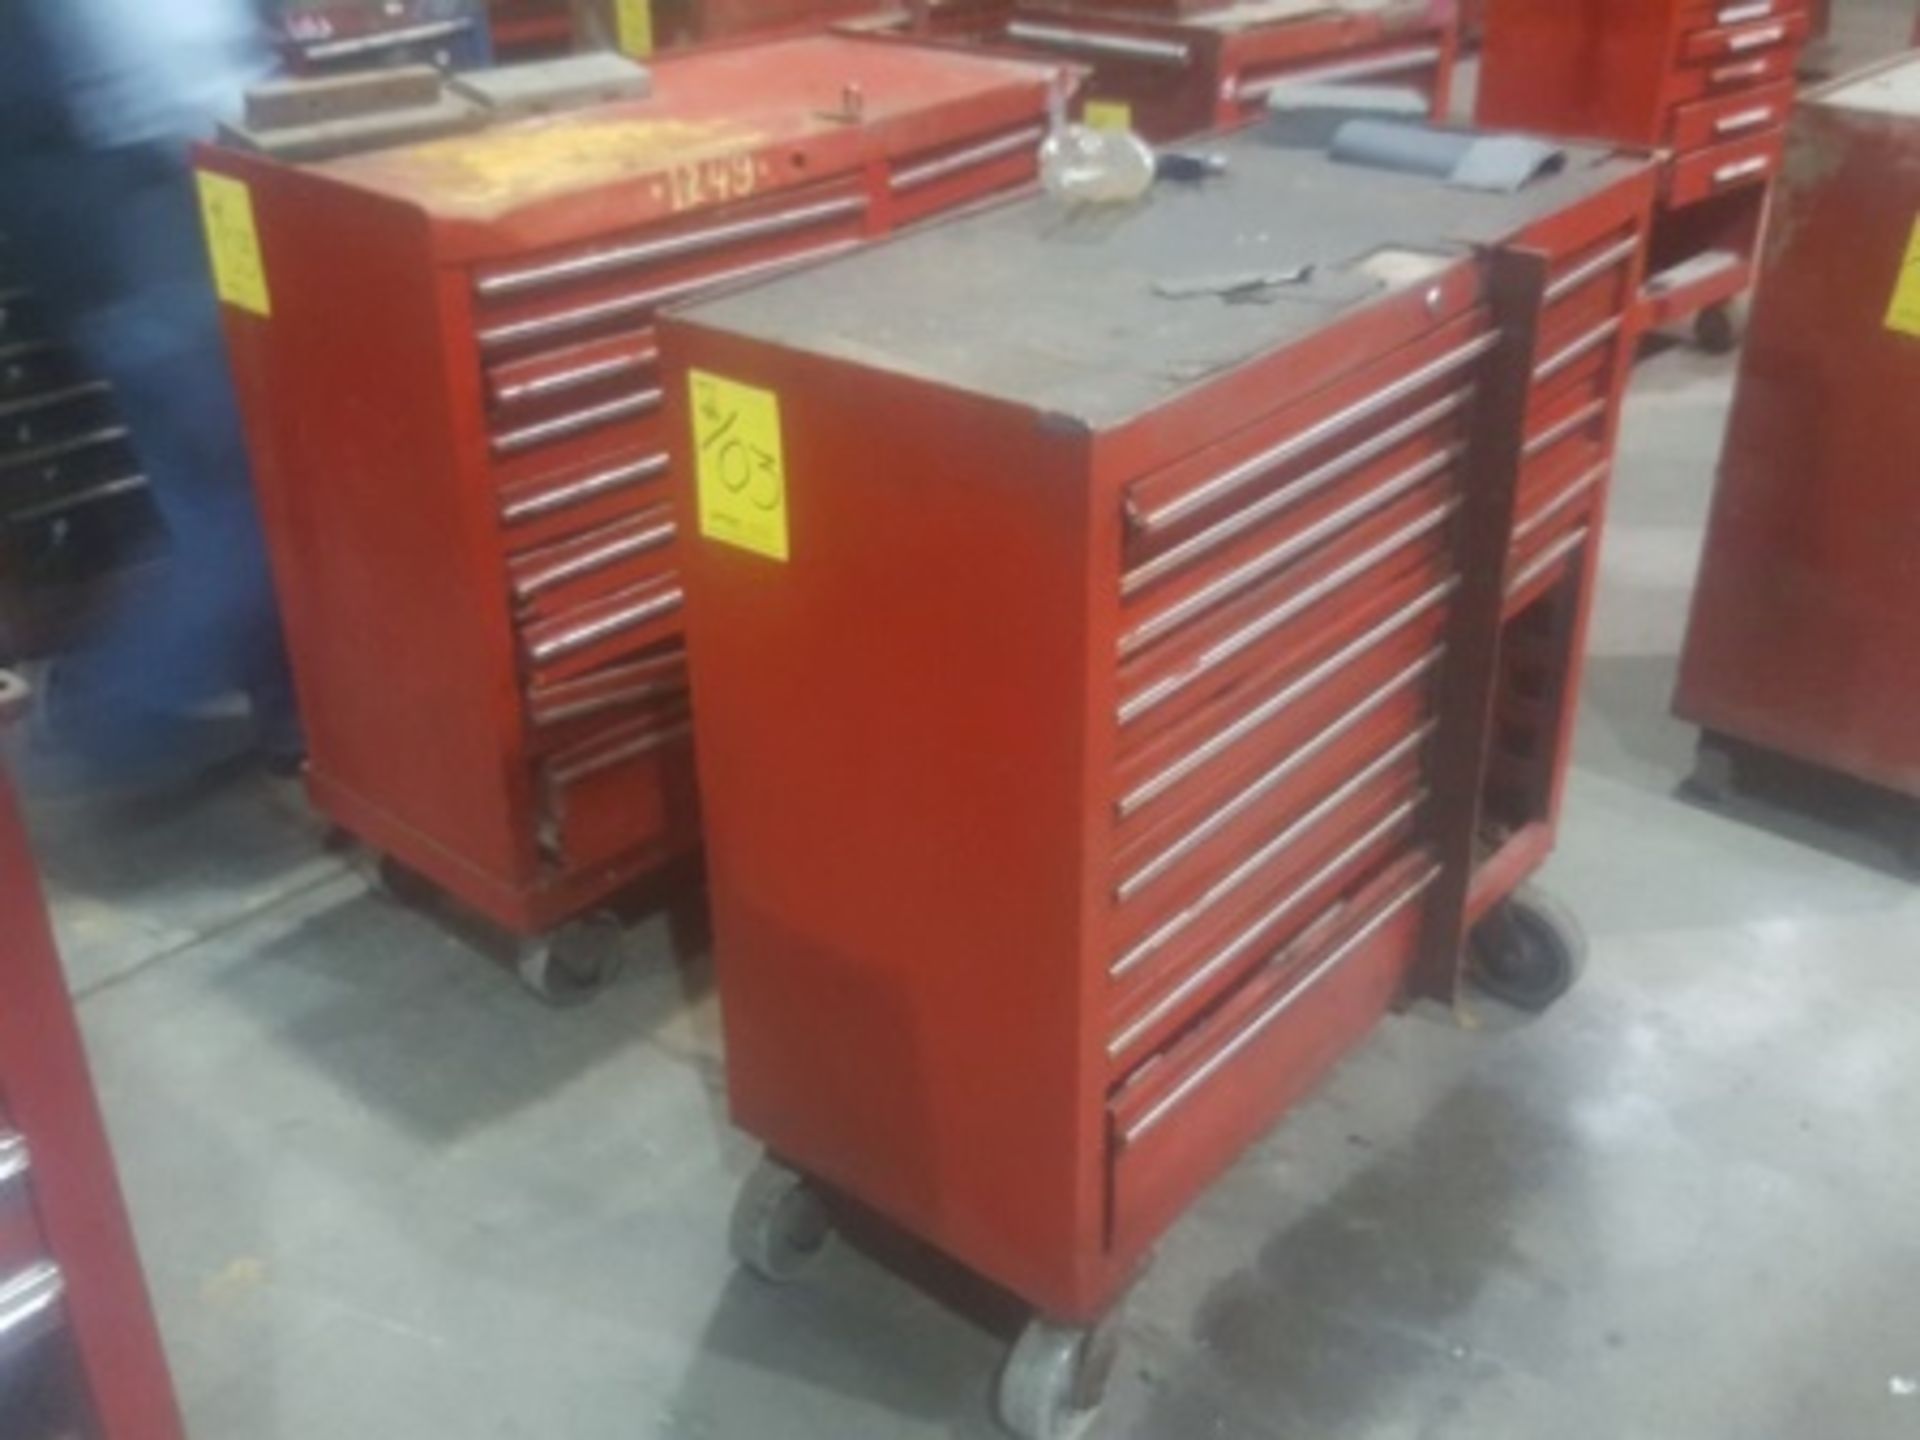 3 Tool cabinets, on casters